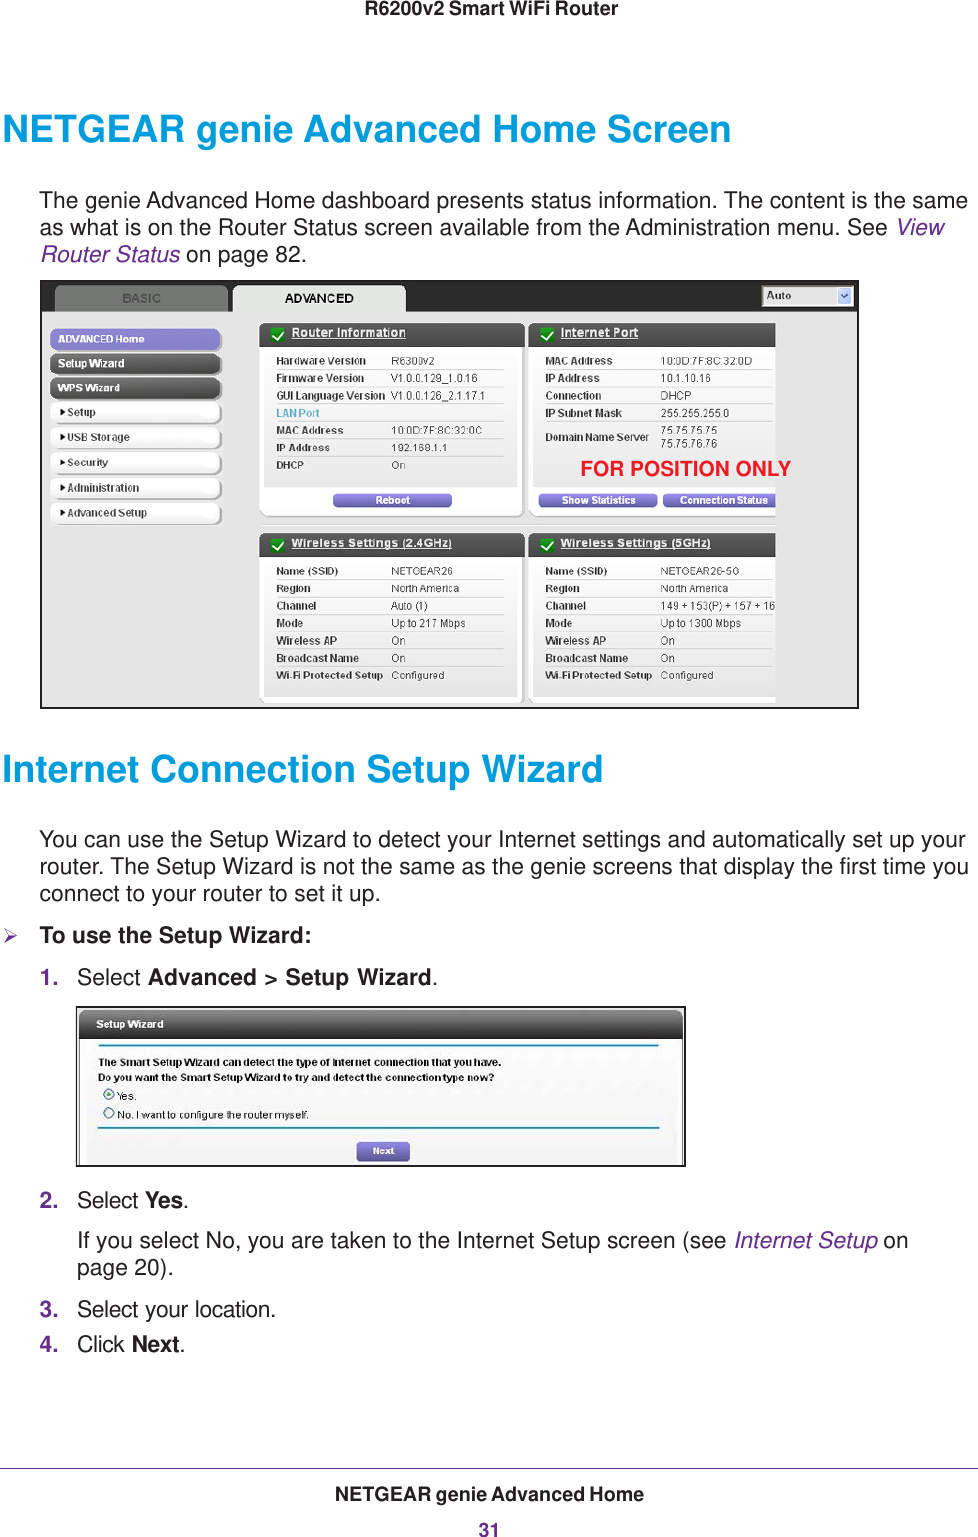 NETGEAR genie Advanced Home31 R6200v2 Smart WiFi RouterNETGEAR genie Advanced Home ScreenThe genie Advanced Home dashboard presents status information. The content is the same as what is on the Router Status screen available from the Administration menu. See View Router Status on page  82.FOR POSITION ONLYInternet Connection Setup WizardYou can use the Setup Wizard to detect your Internet settings and automatically set up your router. The Setup Wizard is not the same as the genie screens that display the first time you connect to your router to set it up.To use the Setup Wizard:1. Select Advanced &gt; Setup Wizard. 2. Select Yes. If you select No, you are taken to the Internet Setup screen (see Internet Setup on page  20). 3. Select your location.4. Click Next.